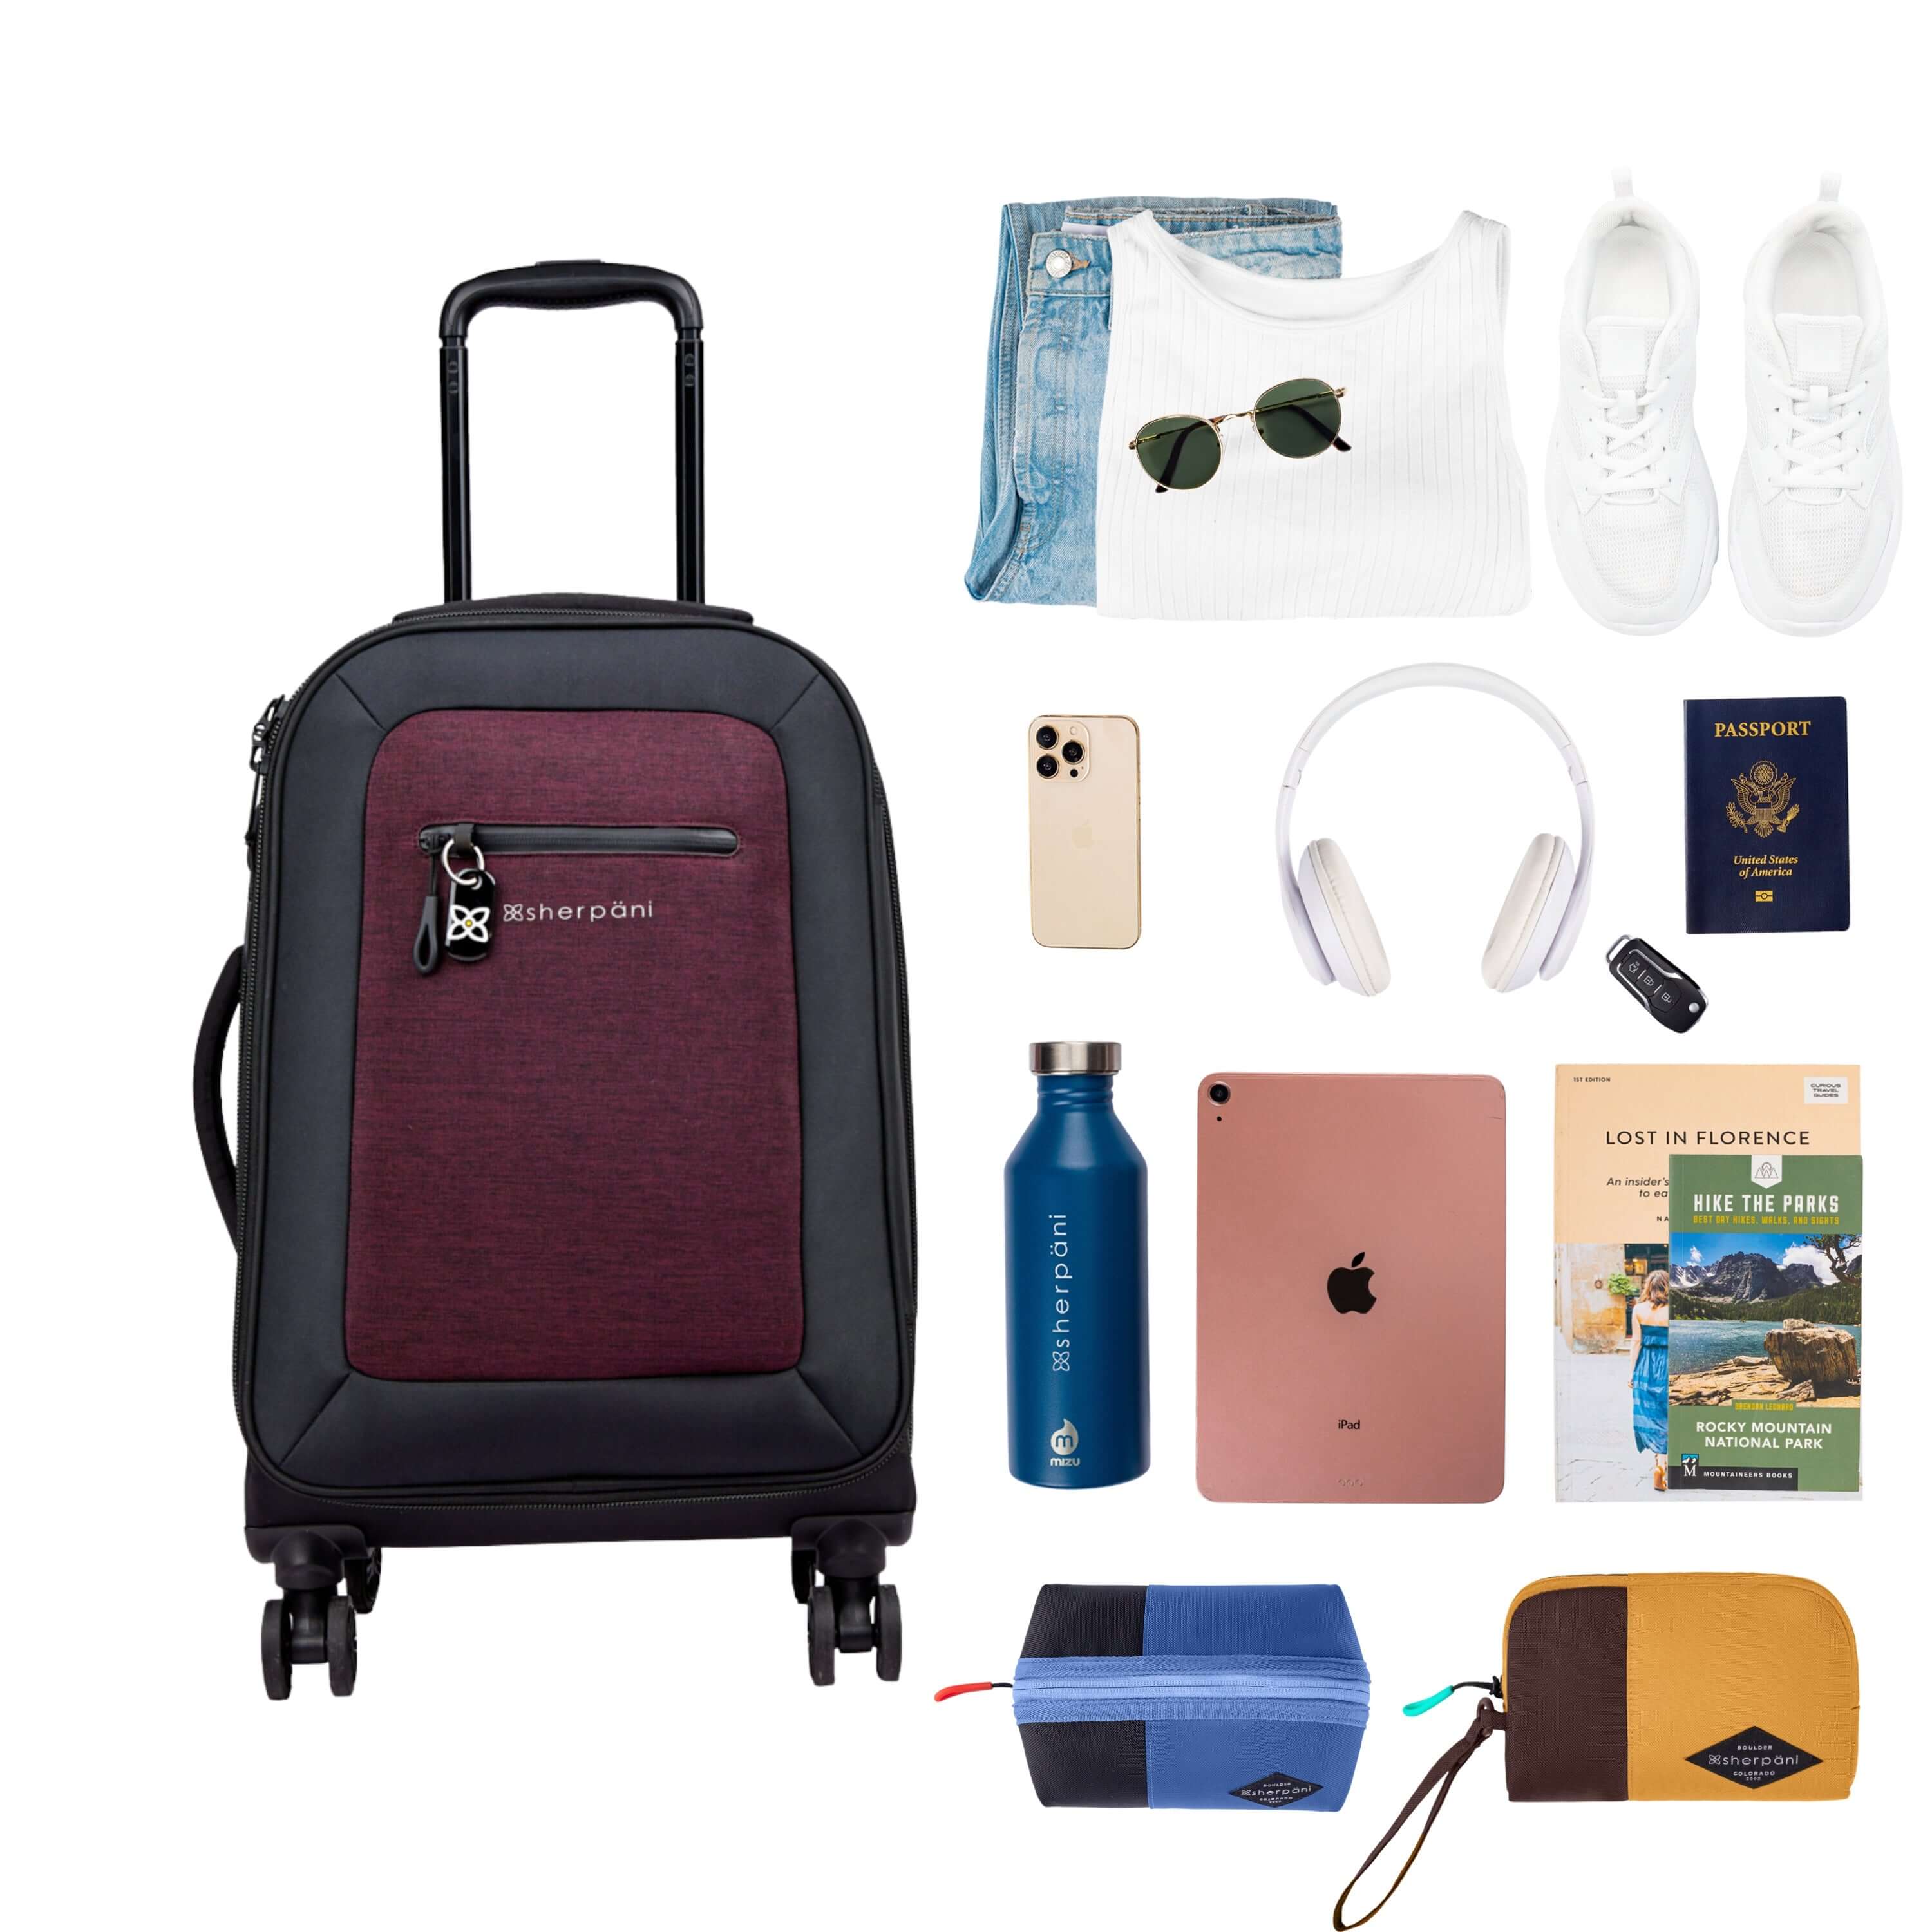 Top view of example items to fill the suitcase. On the left lies Sherpani’s Anti-Theft luggage, the Latitude in Merlot. On the right lies an assortment of items: change of clothes, sunglasses, sneakers, phone, headphones, car key, passport, water bottle, tablet, travel books and Sherpani travel accessories the Harmony in Pacific Blue and the Jolie in Sundial.